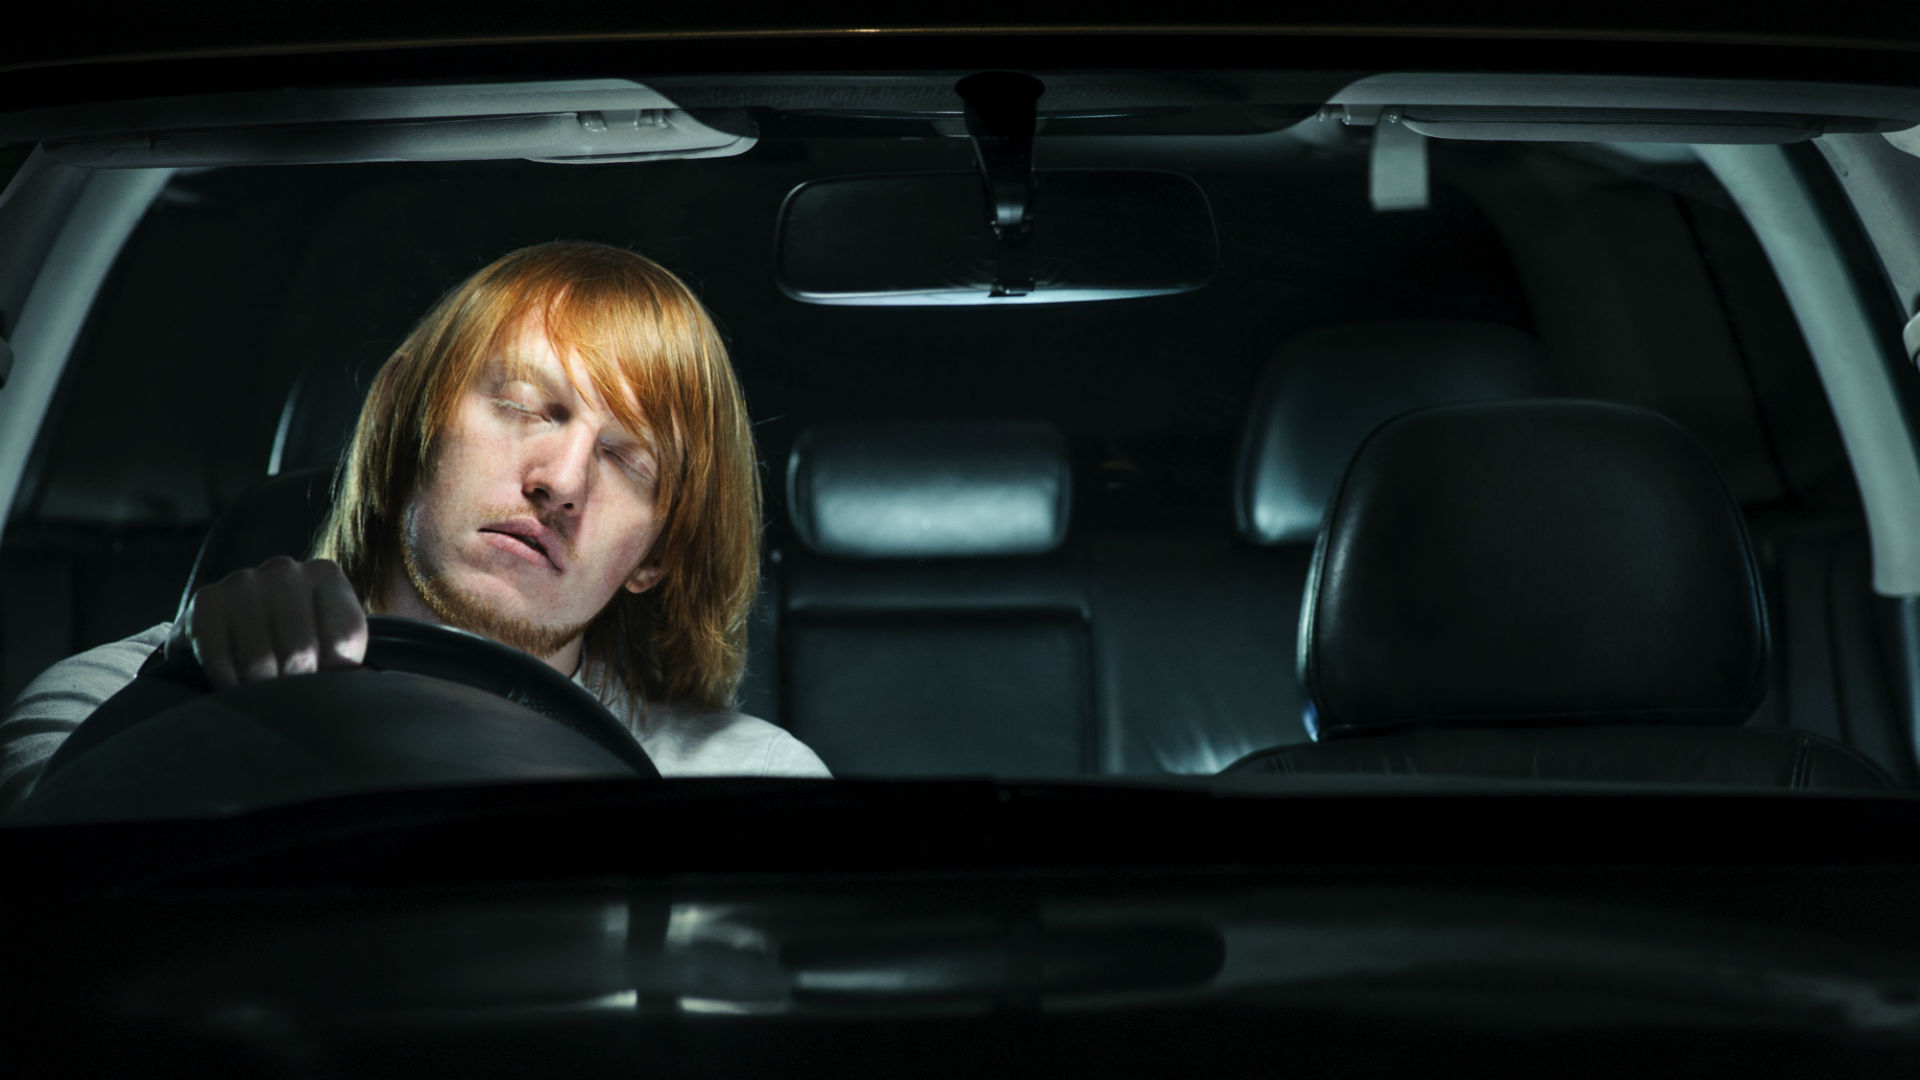 How to stay awake behind the wheel